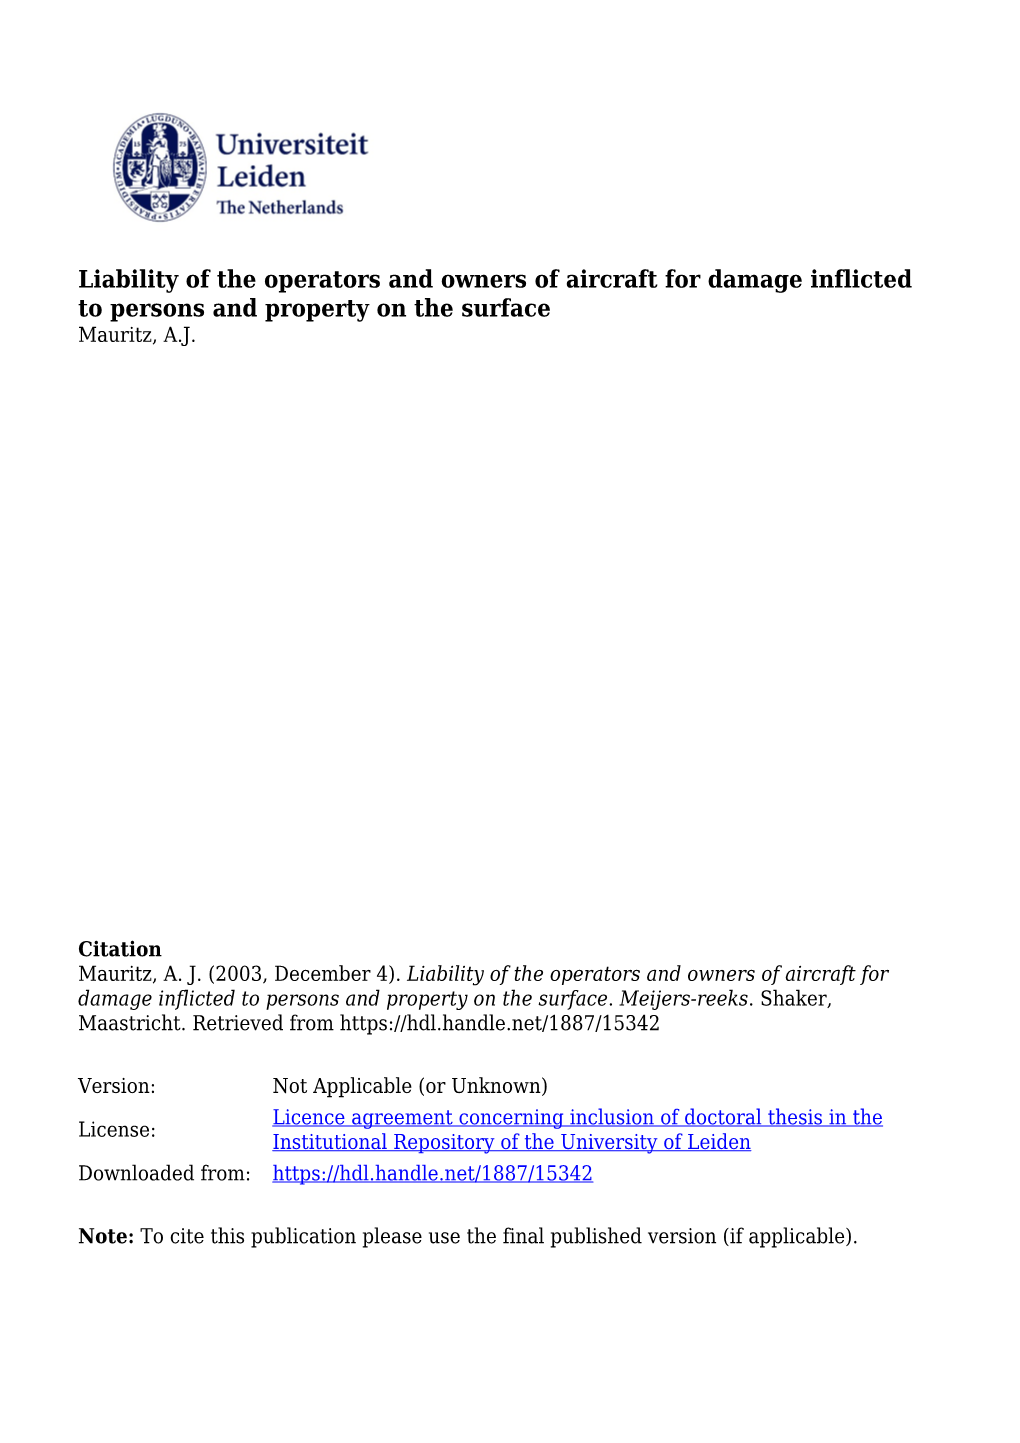 Liability of the Operators and Owners of Aircraft for Damage Inflicted to Persons and Property on the Surface Mauritz, A.J